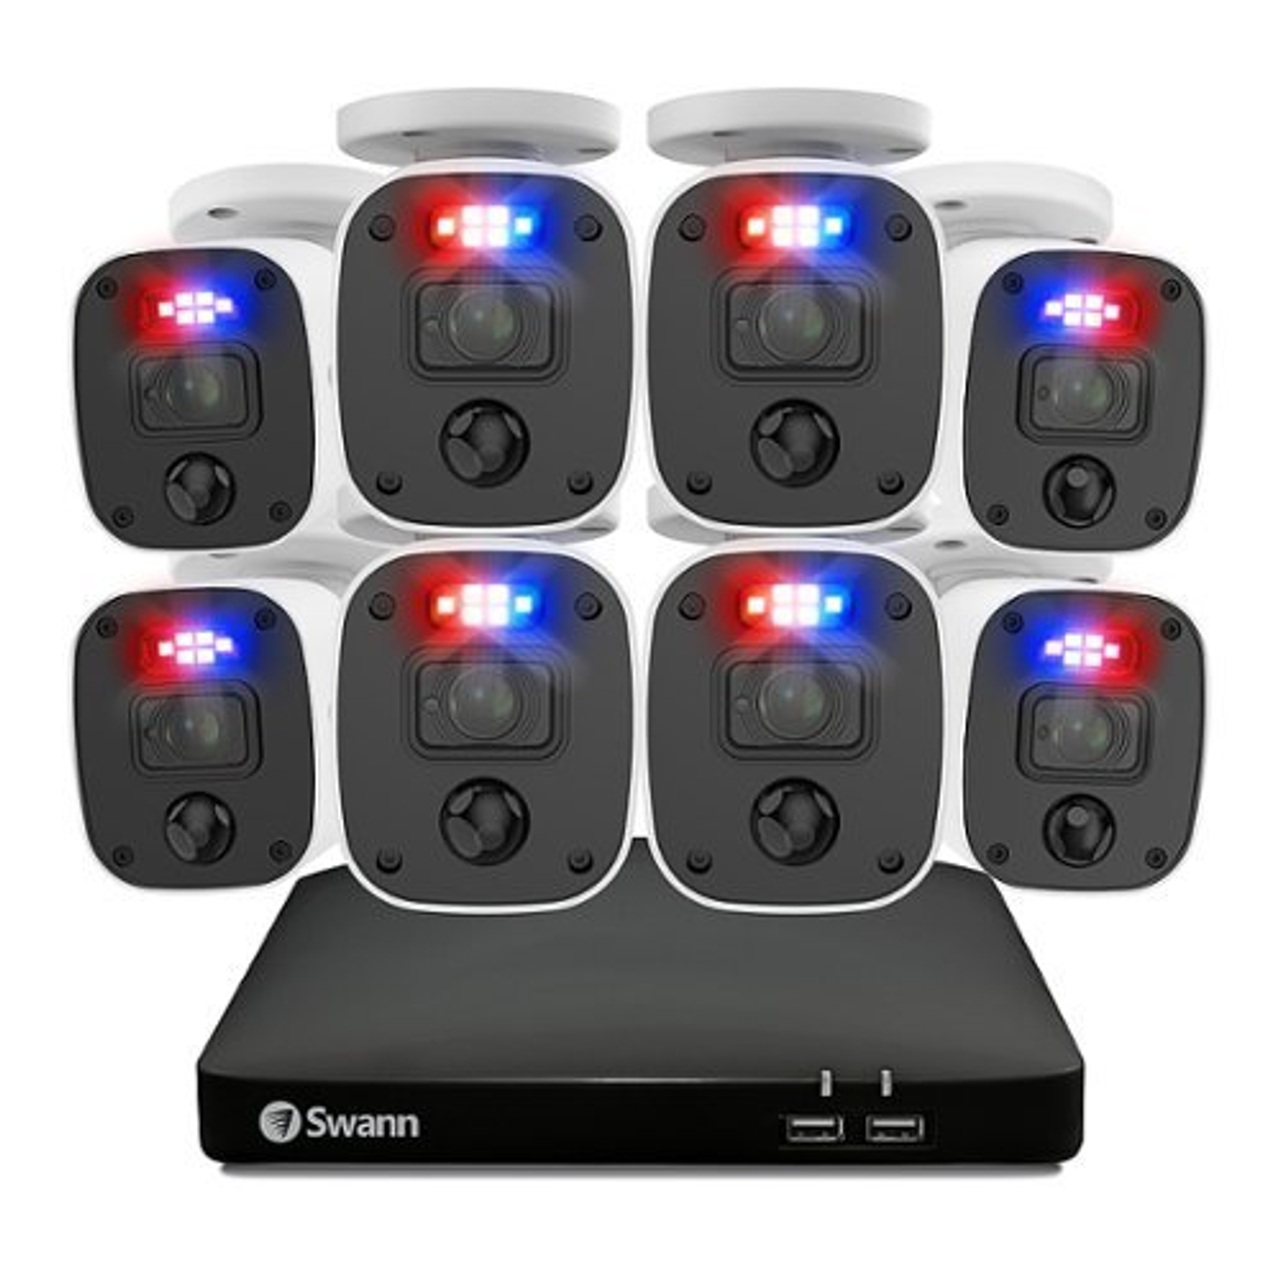 Swann - Enforcer 8 Channel,  8 Camera Indoor/Outdoor, Wired 1080p 1TB HD DVR Security System with 1-Way Audio over Coax